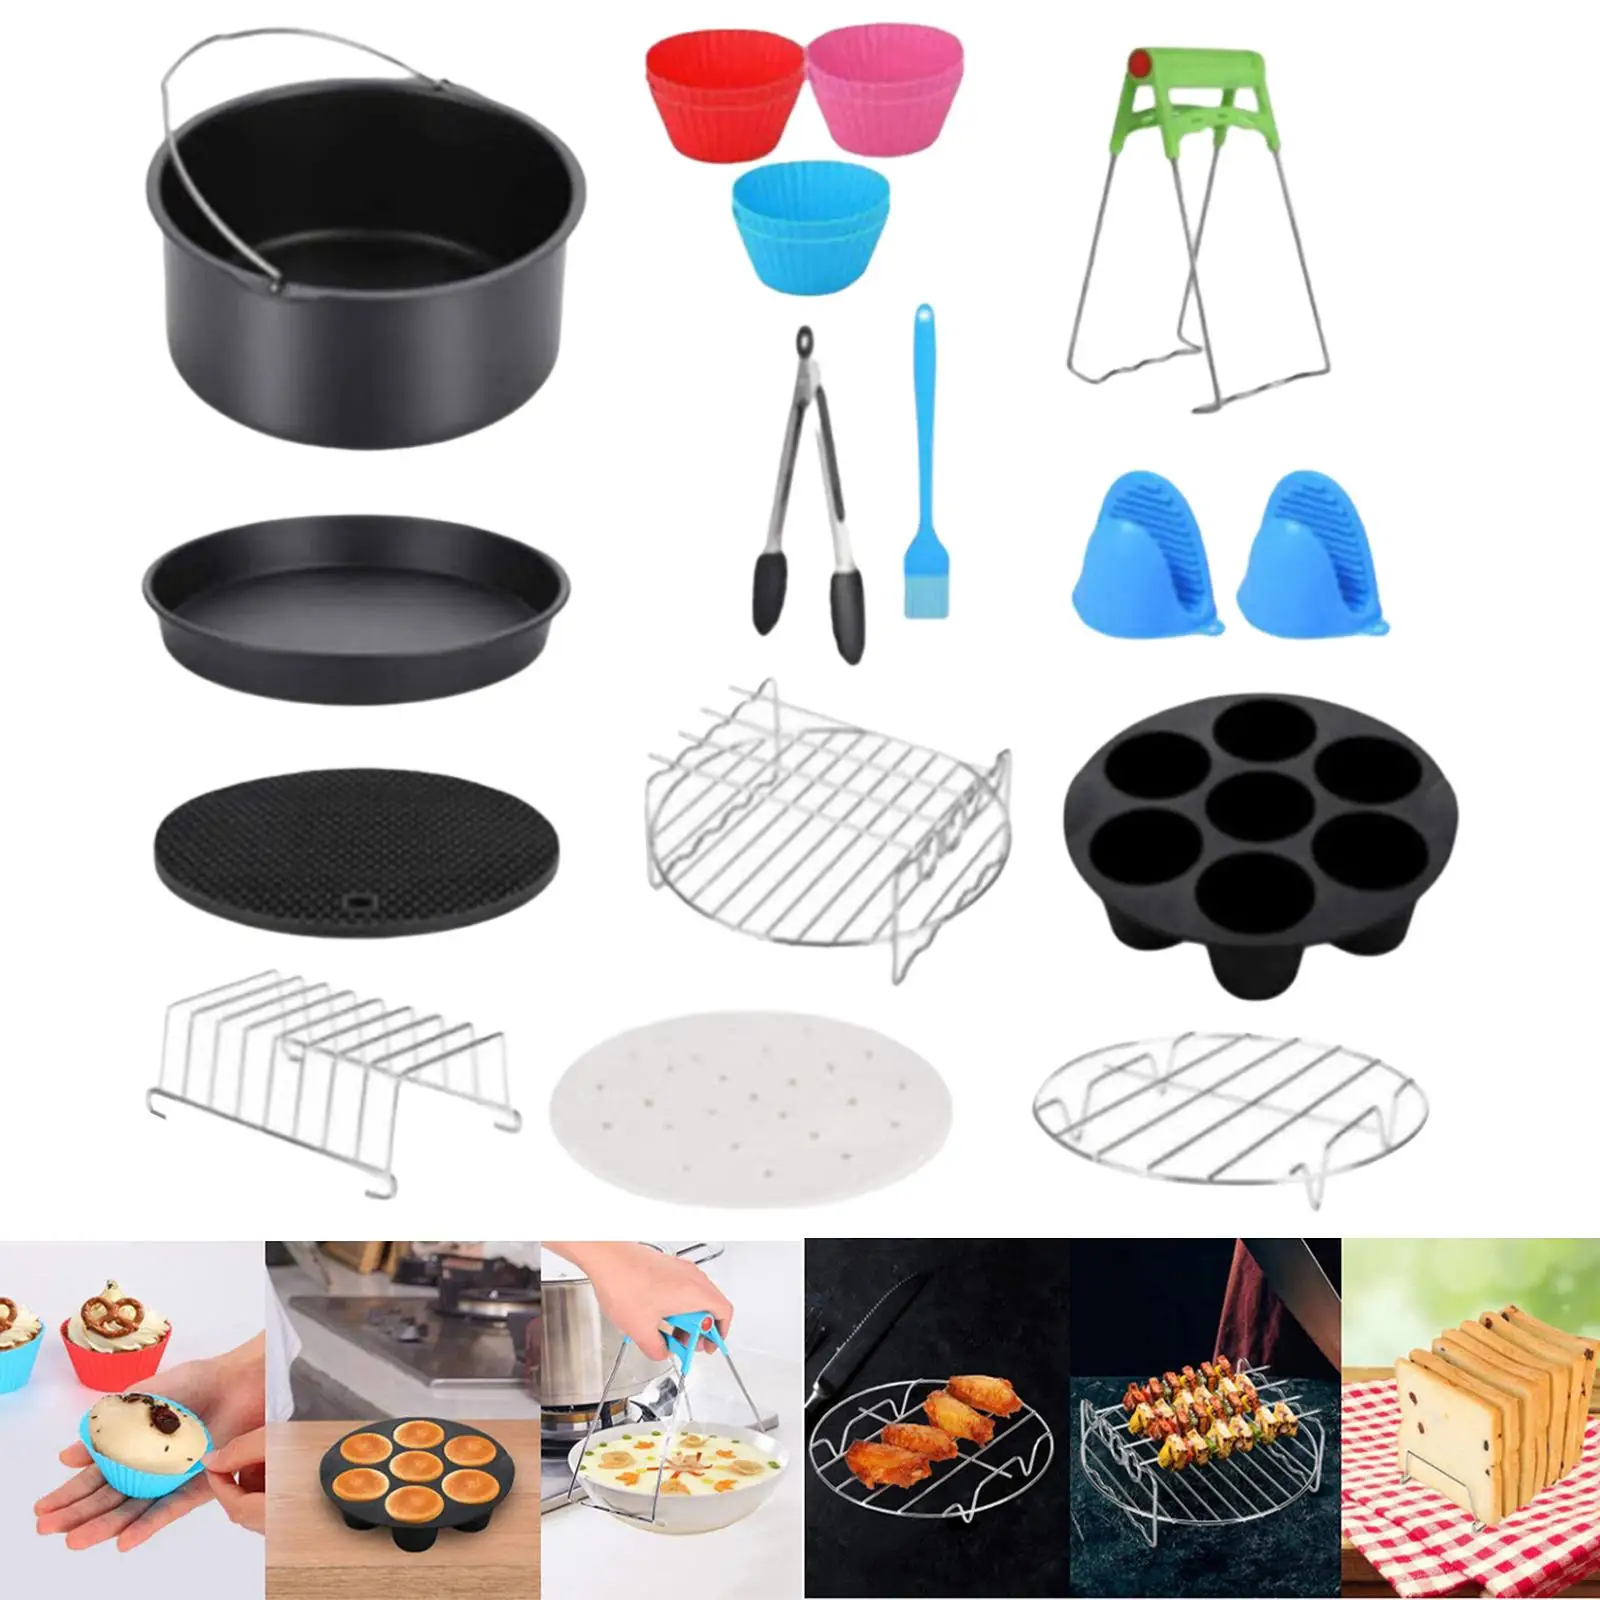 13Pcs 8 inch Air Fryer Accessories Set for 3.8 to 8Qt Food Grade Material